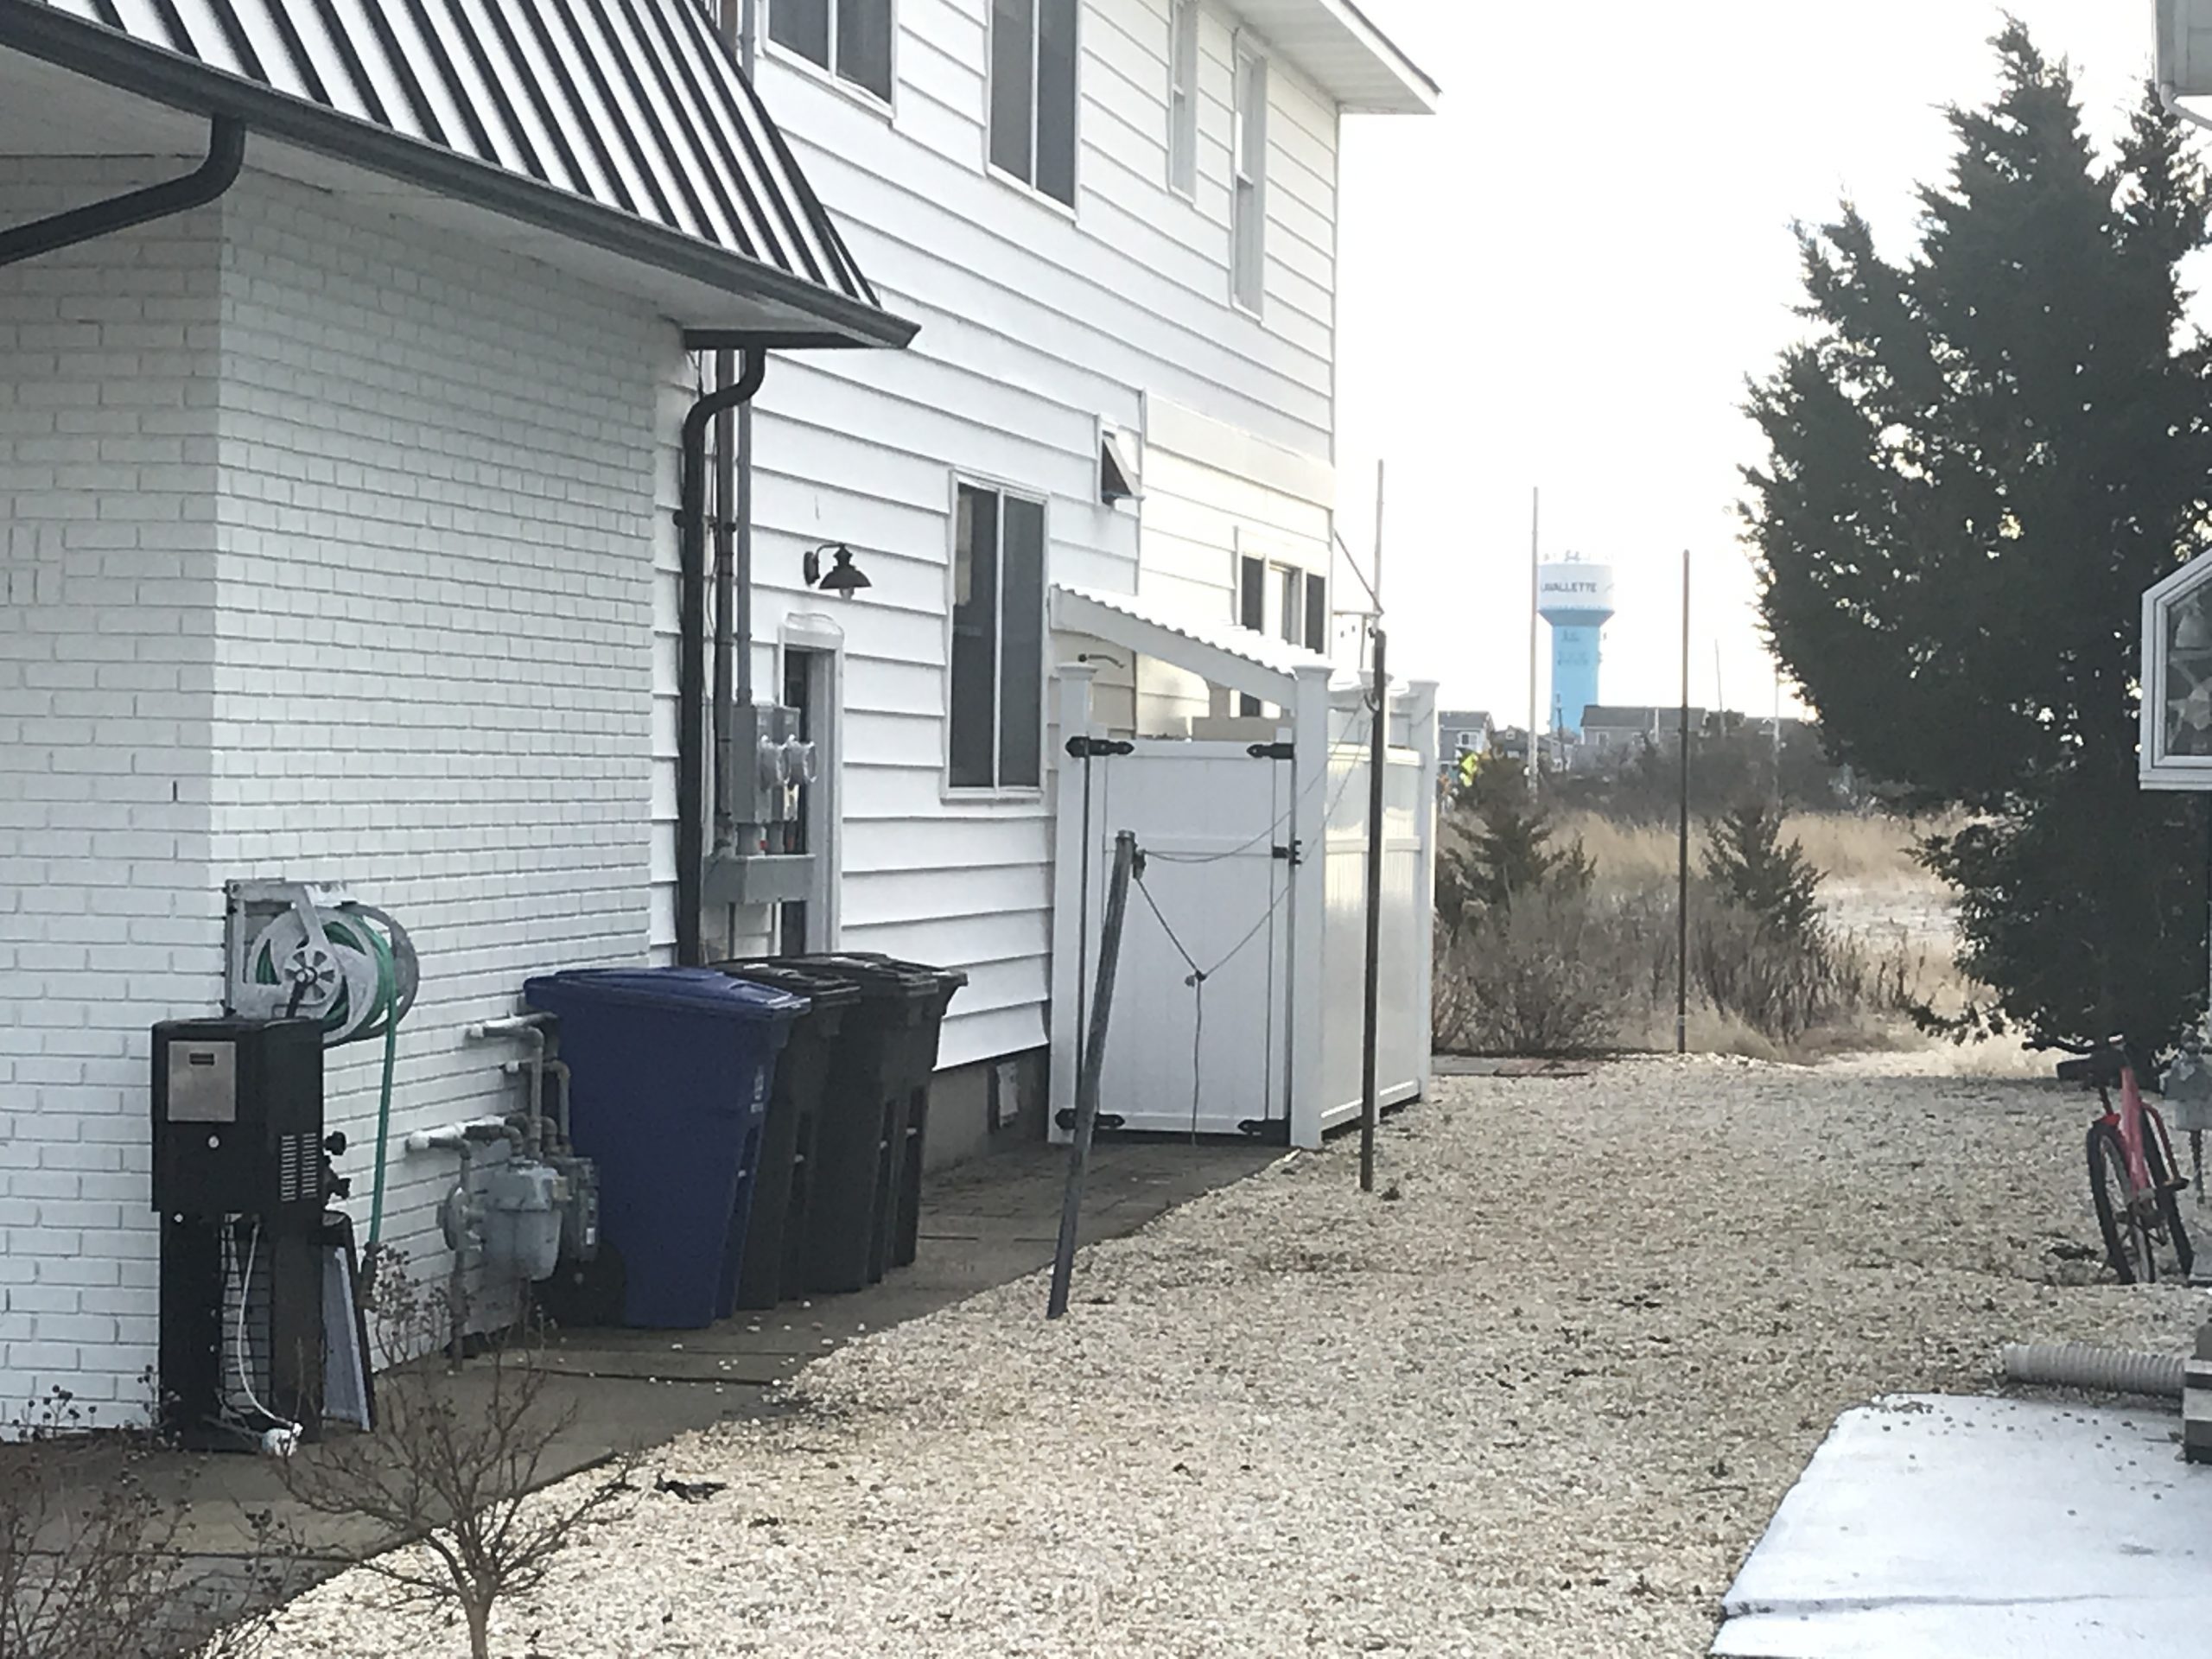 Trash and recycling cans beside a house in Lavallette. (Photo: Daniel Nee)